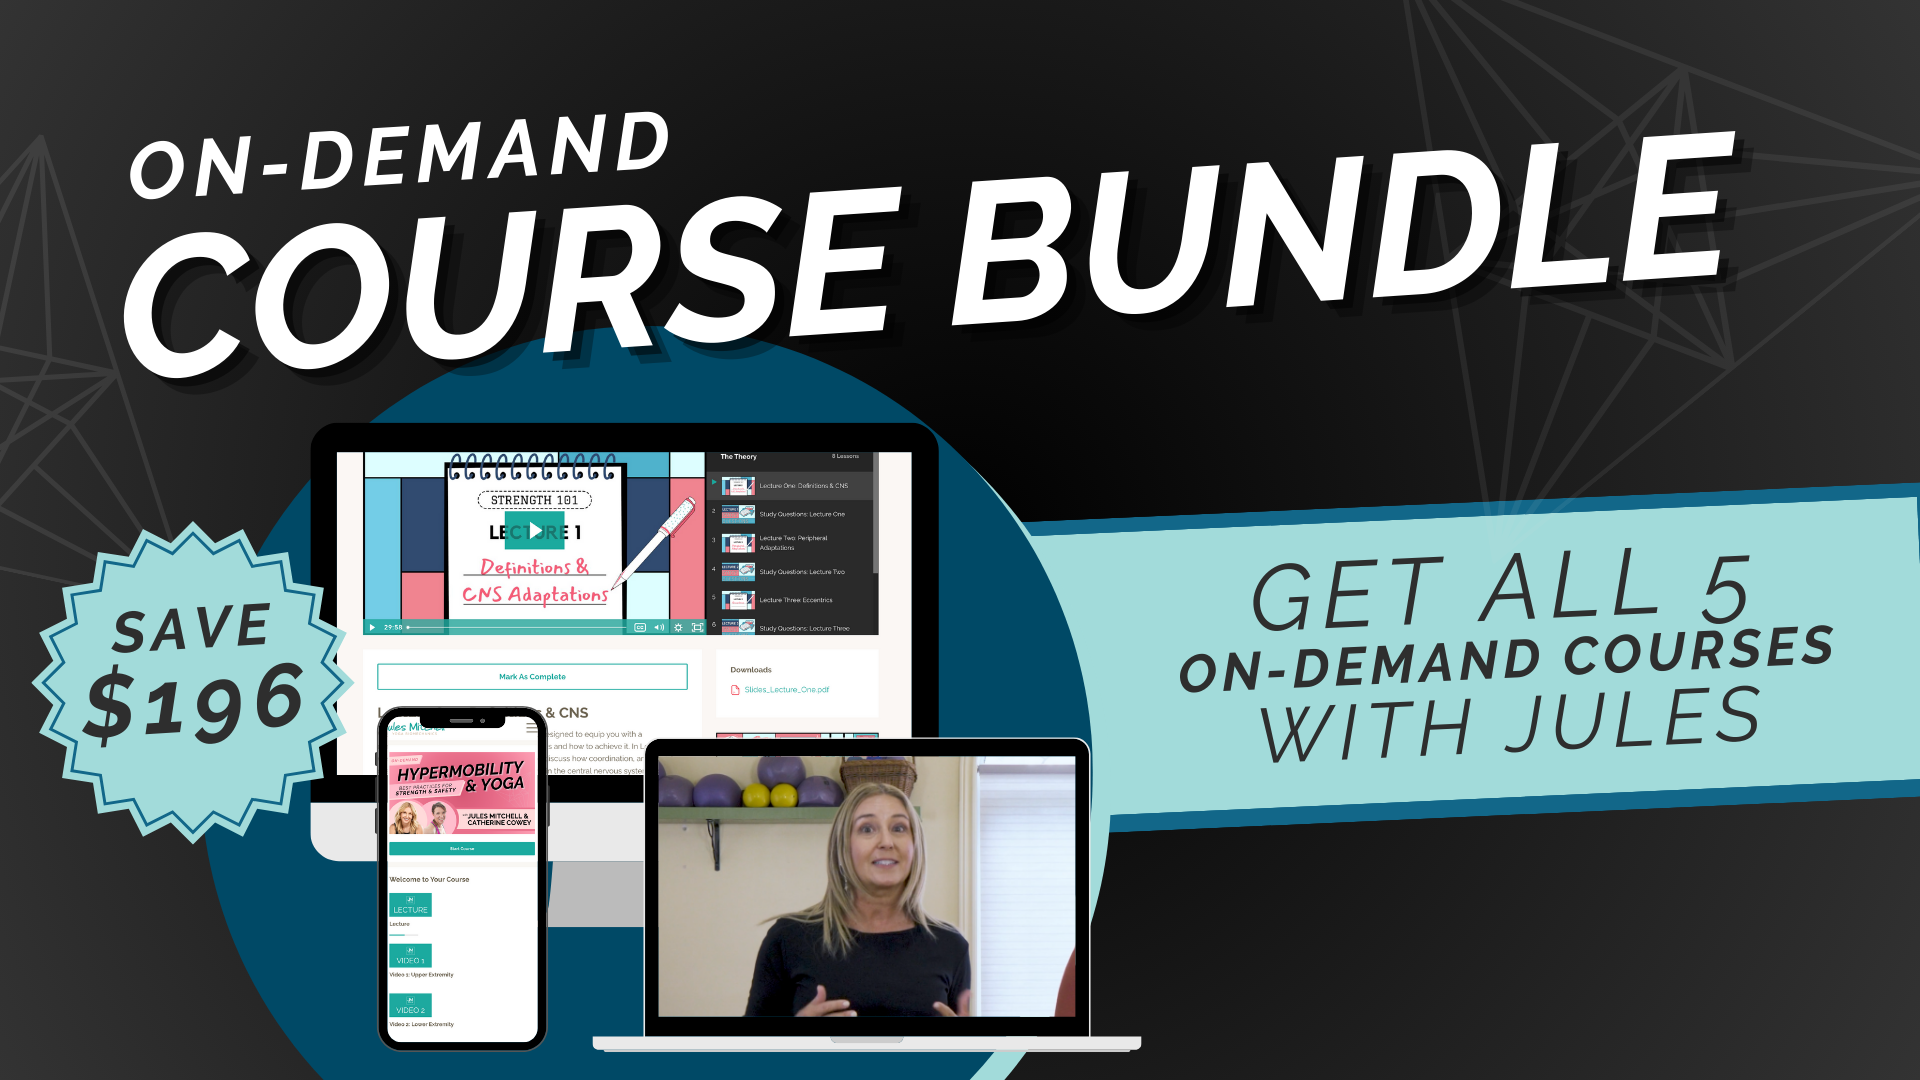 On-Demand Course Bundle - Get all 5 on-demand courses with Jules, save $196